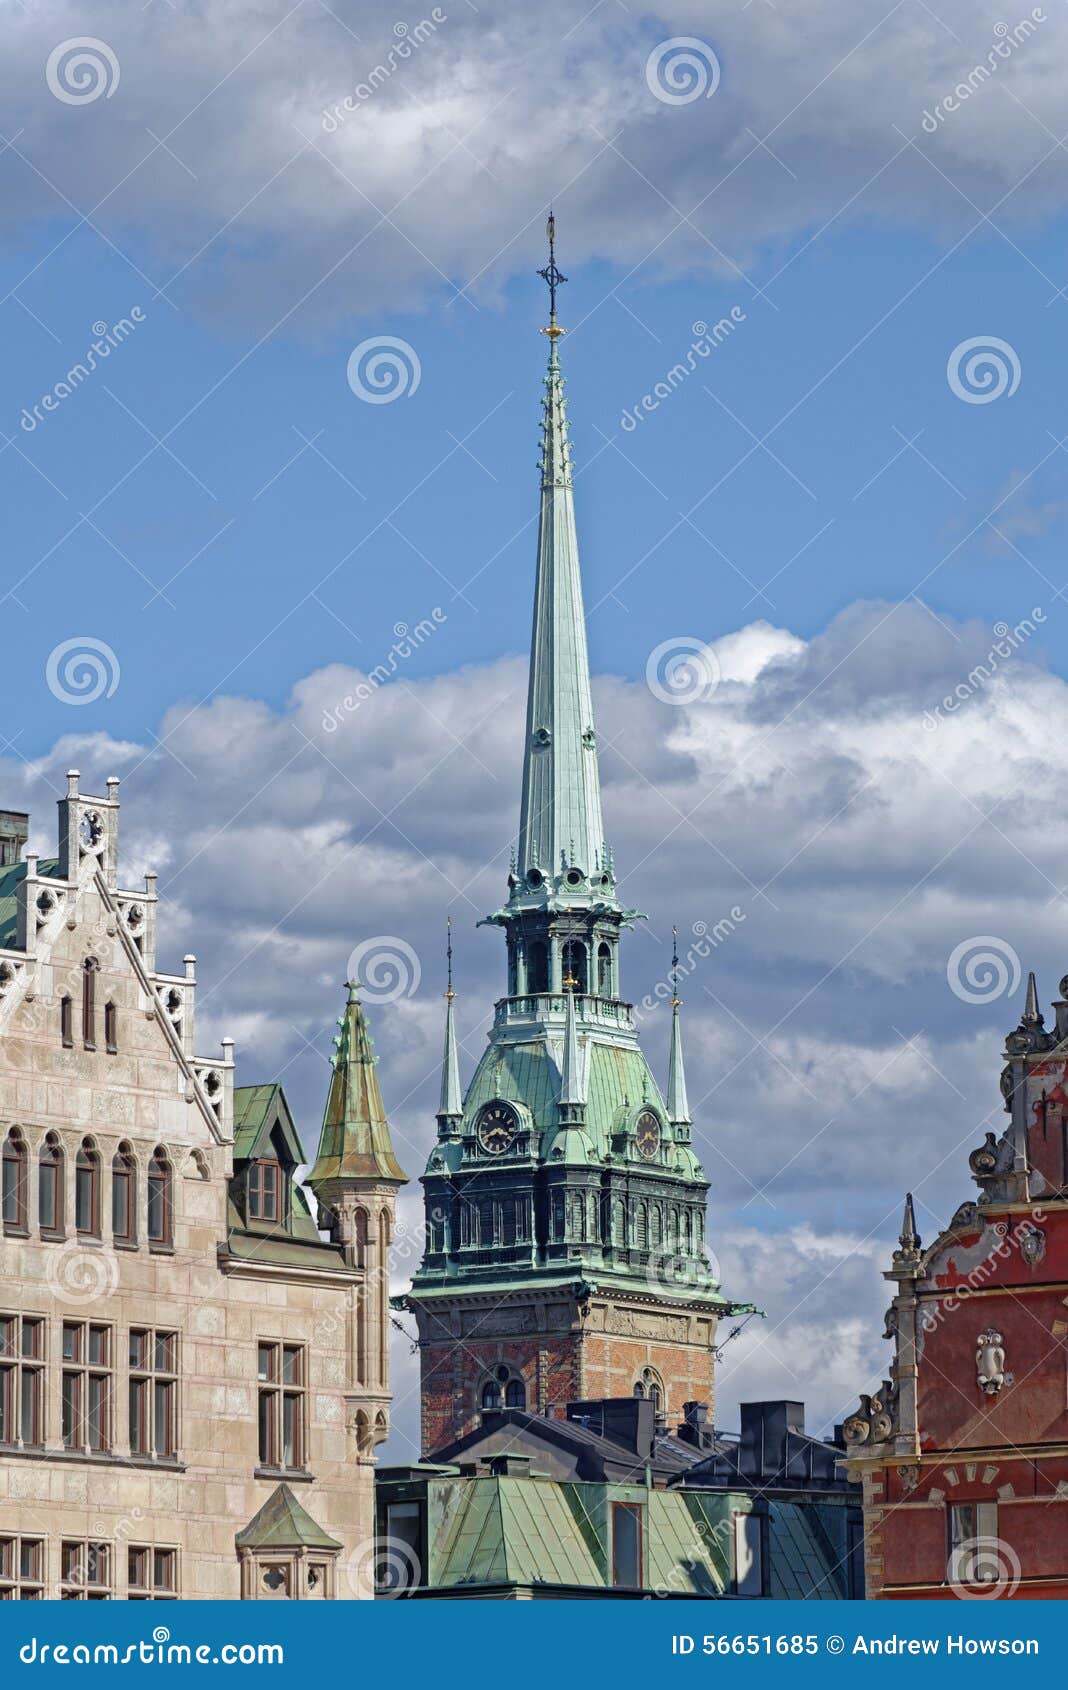 Church spire stock image. Image of culture, gold, capital - 56651685